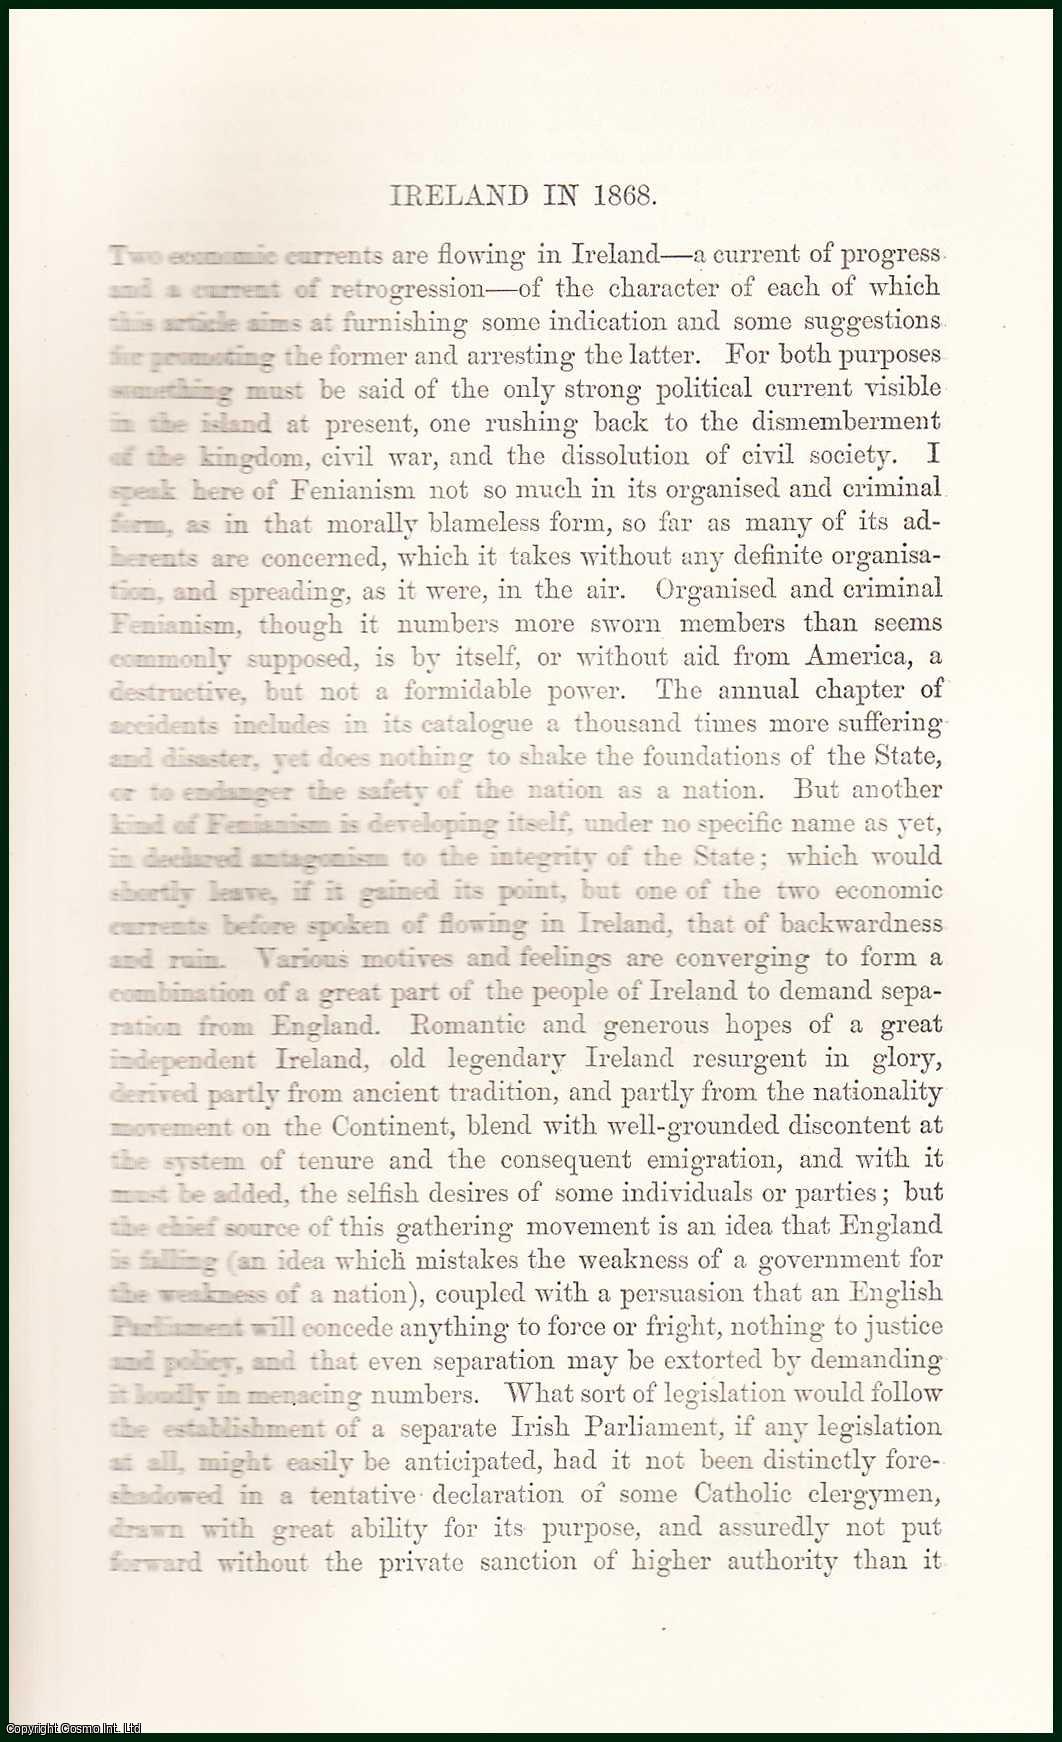 T.E. Cliffe Leslie - Ireland in 1868 : Two Economic currents are flowing in Ireland - a current of Progress & a current of Retrogression. An uncommon original article from The Fortnightly Review, 1868.